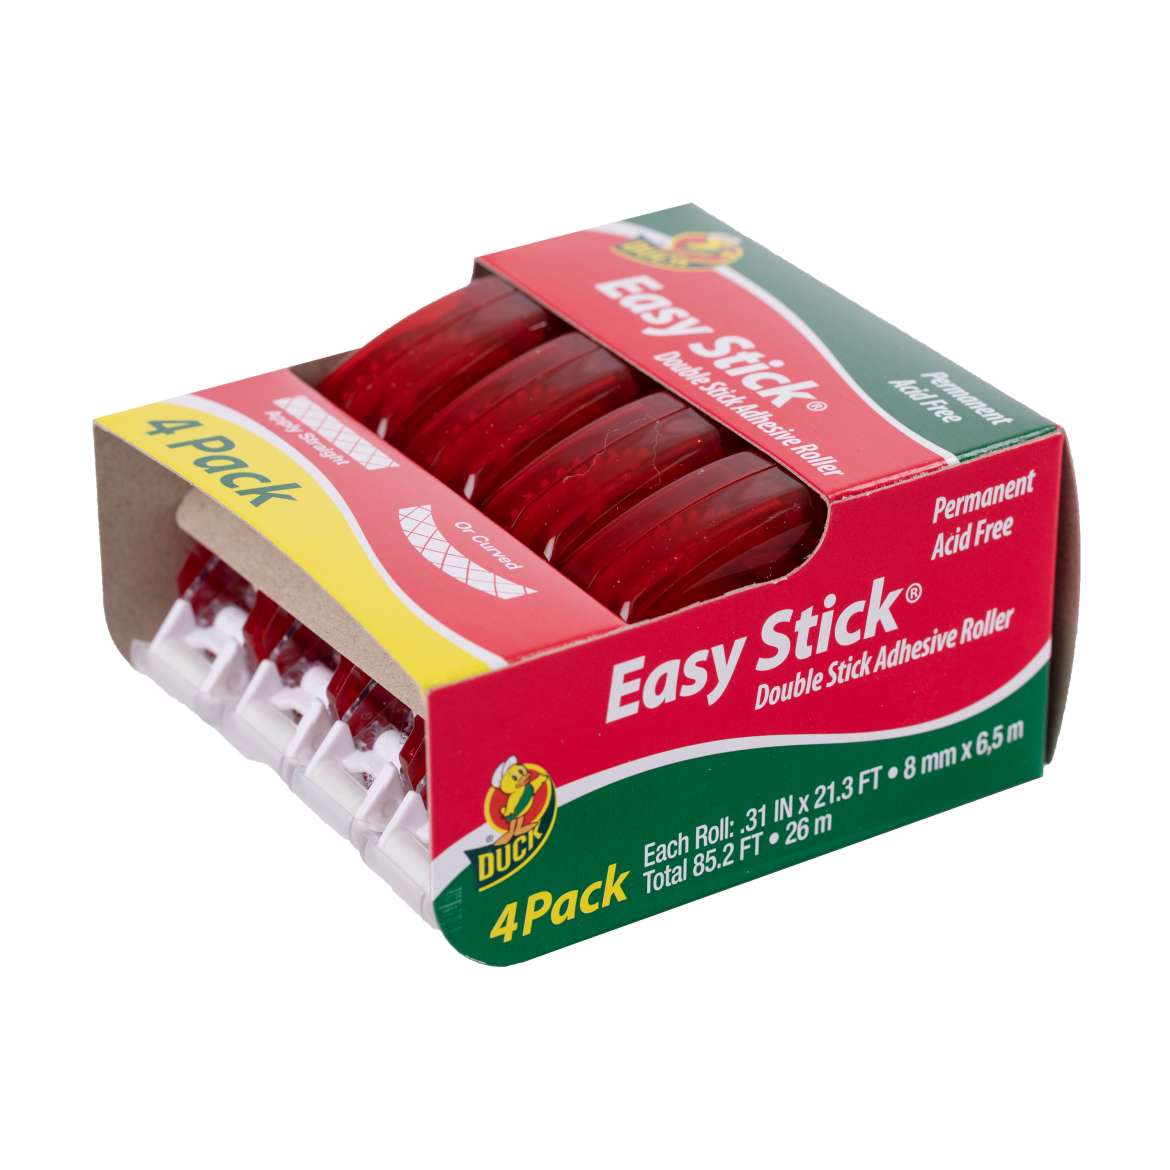 Easy Stick® Adhesive Rollers